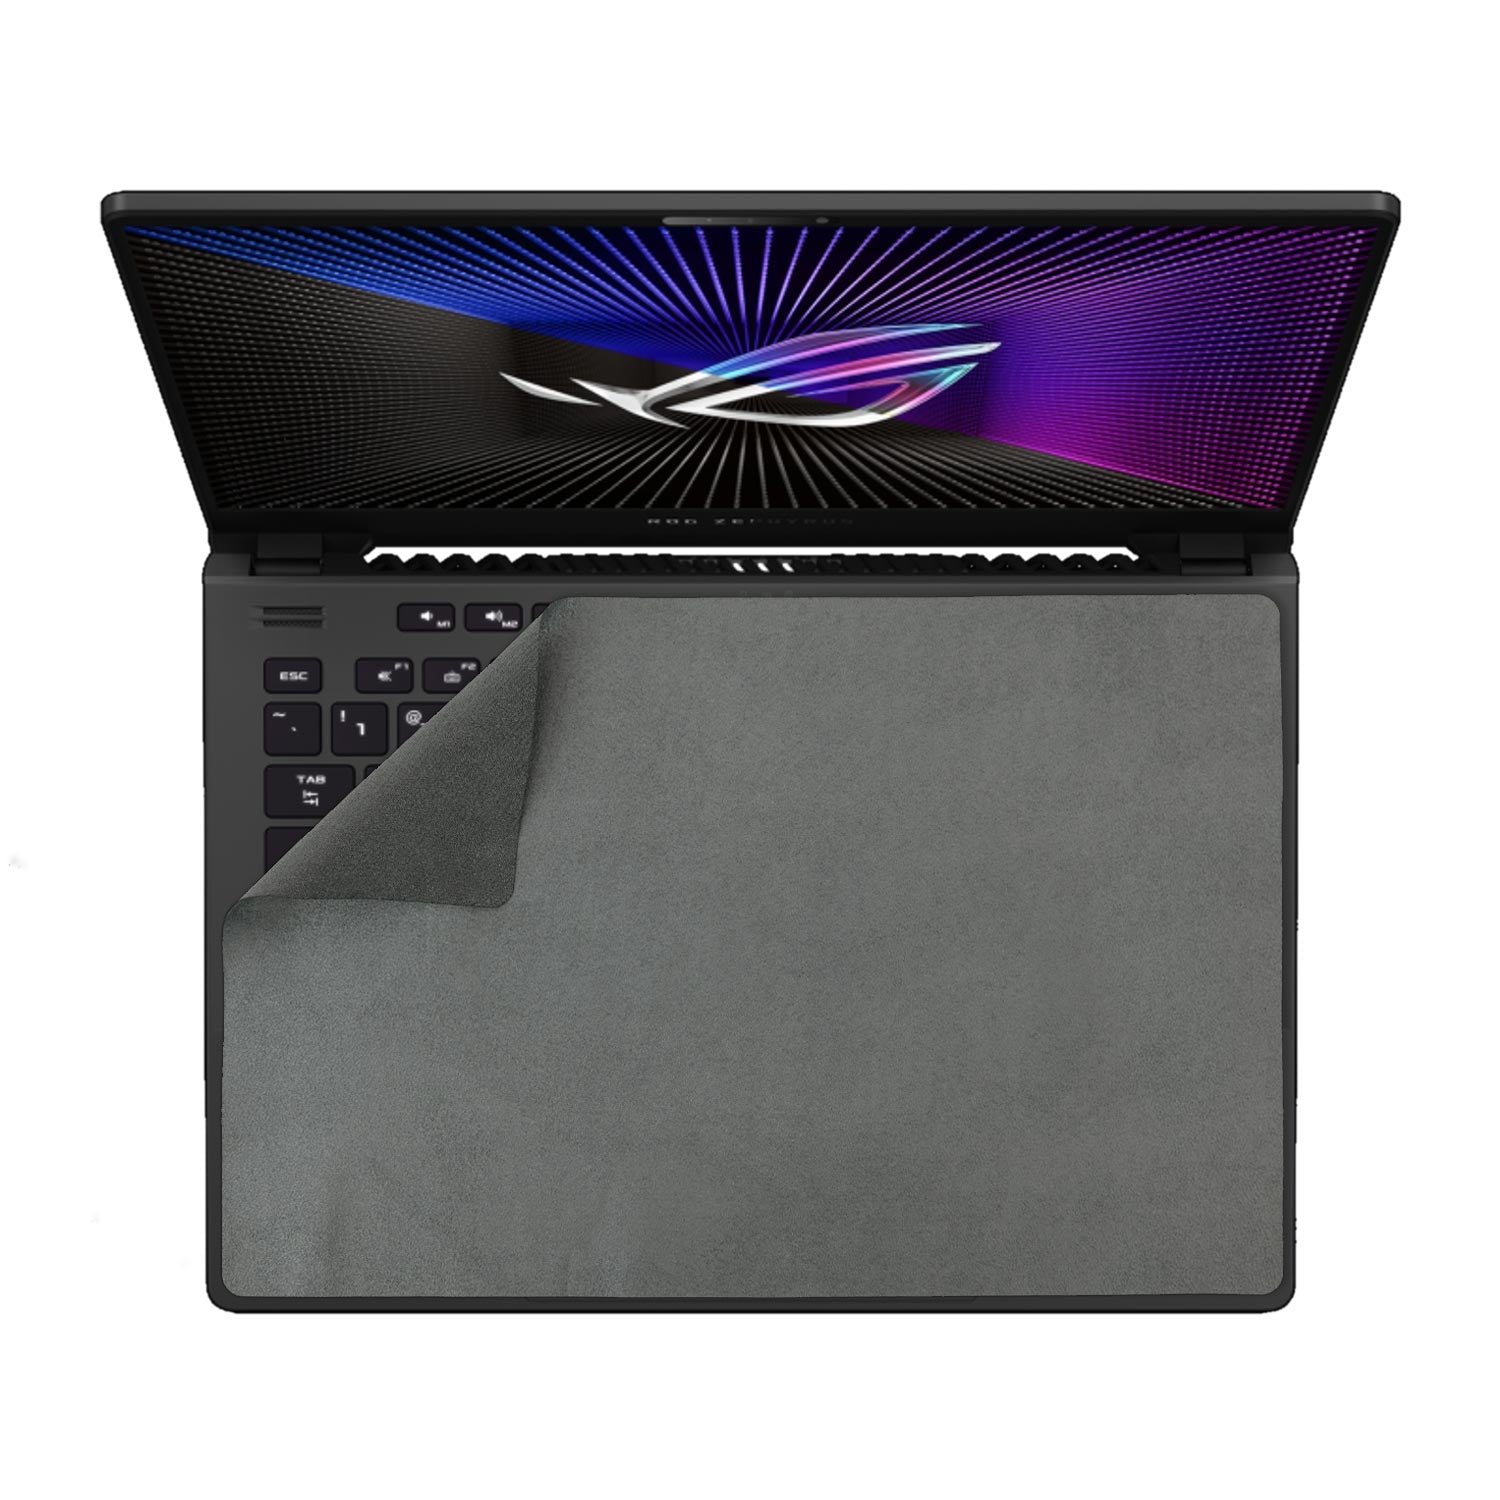 14" TurboSuede Laptop Screen Protector, Keyboard Cover Cloth, Microfiber Wipe 3-in-1 - ShaggyMax